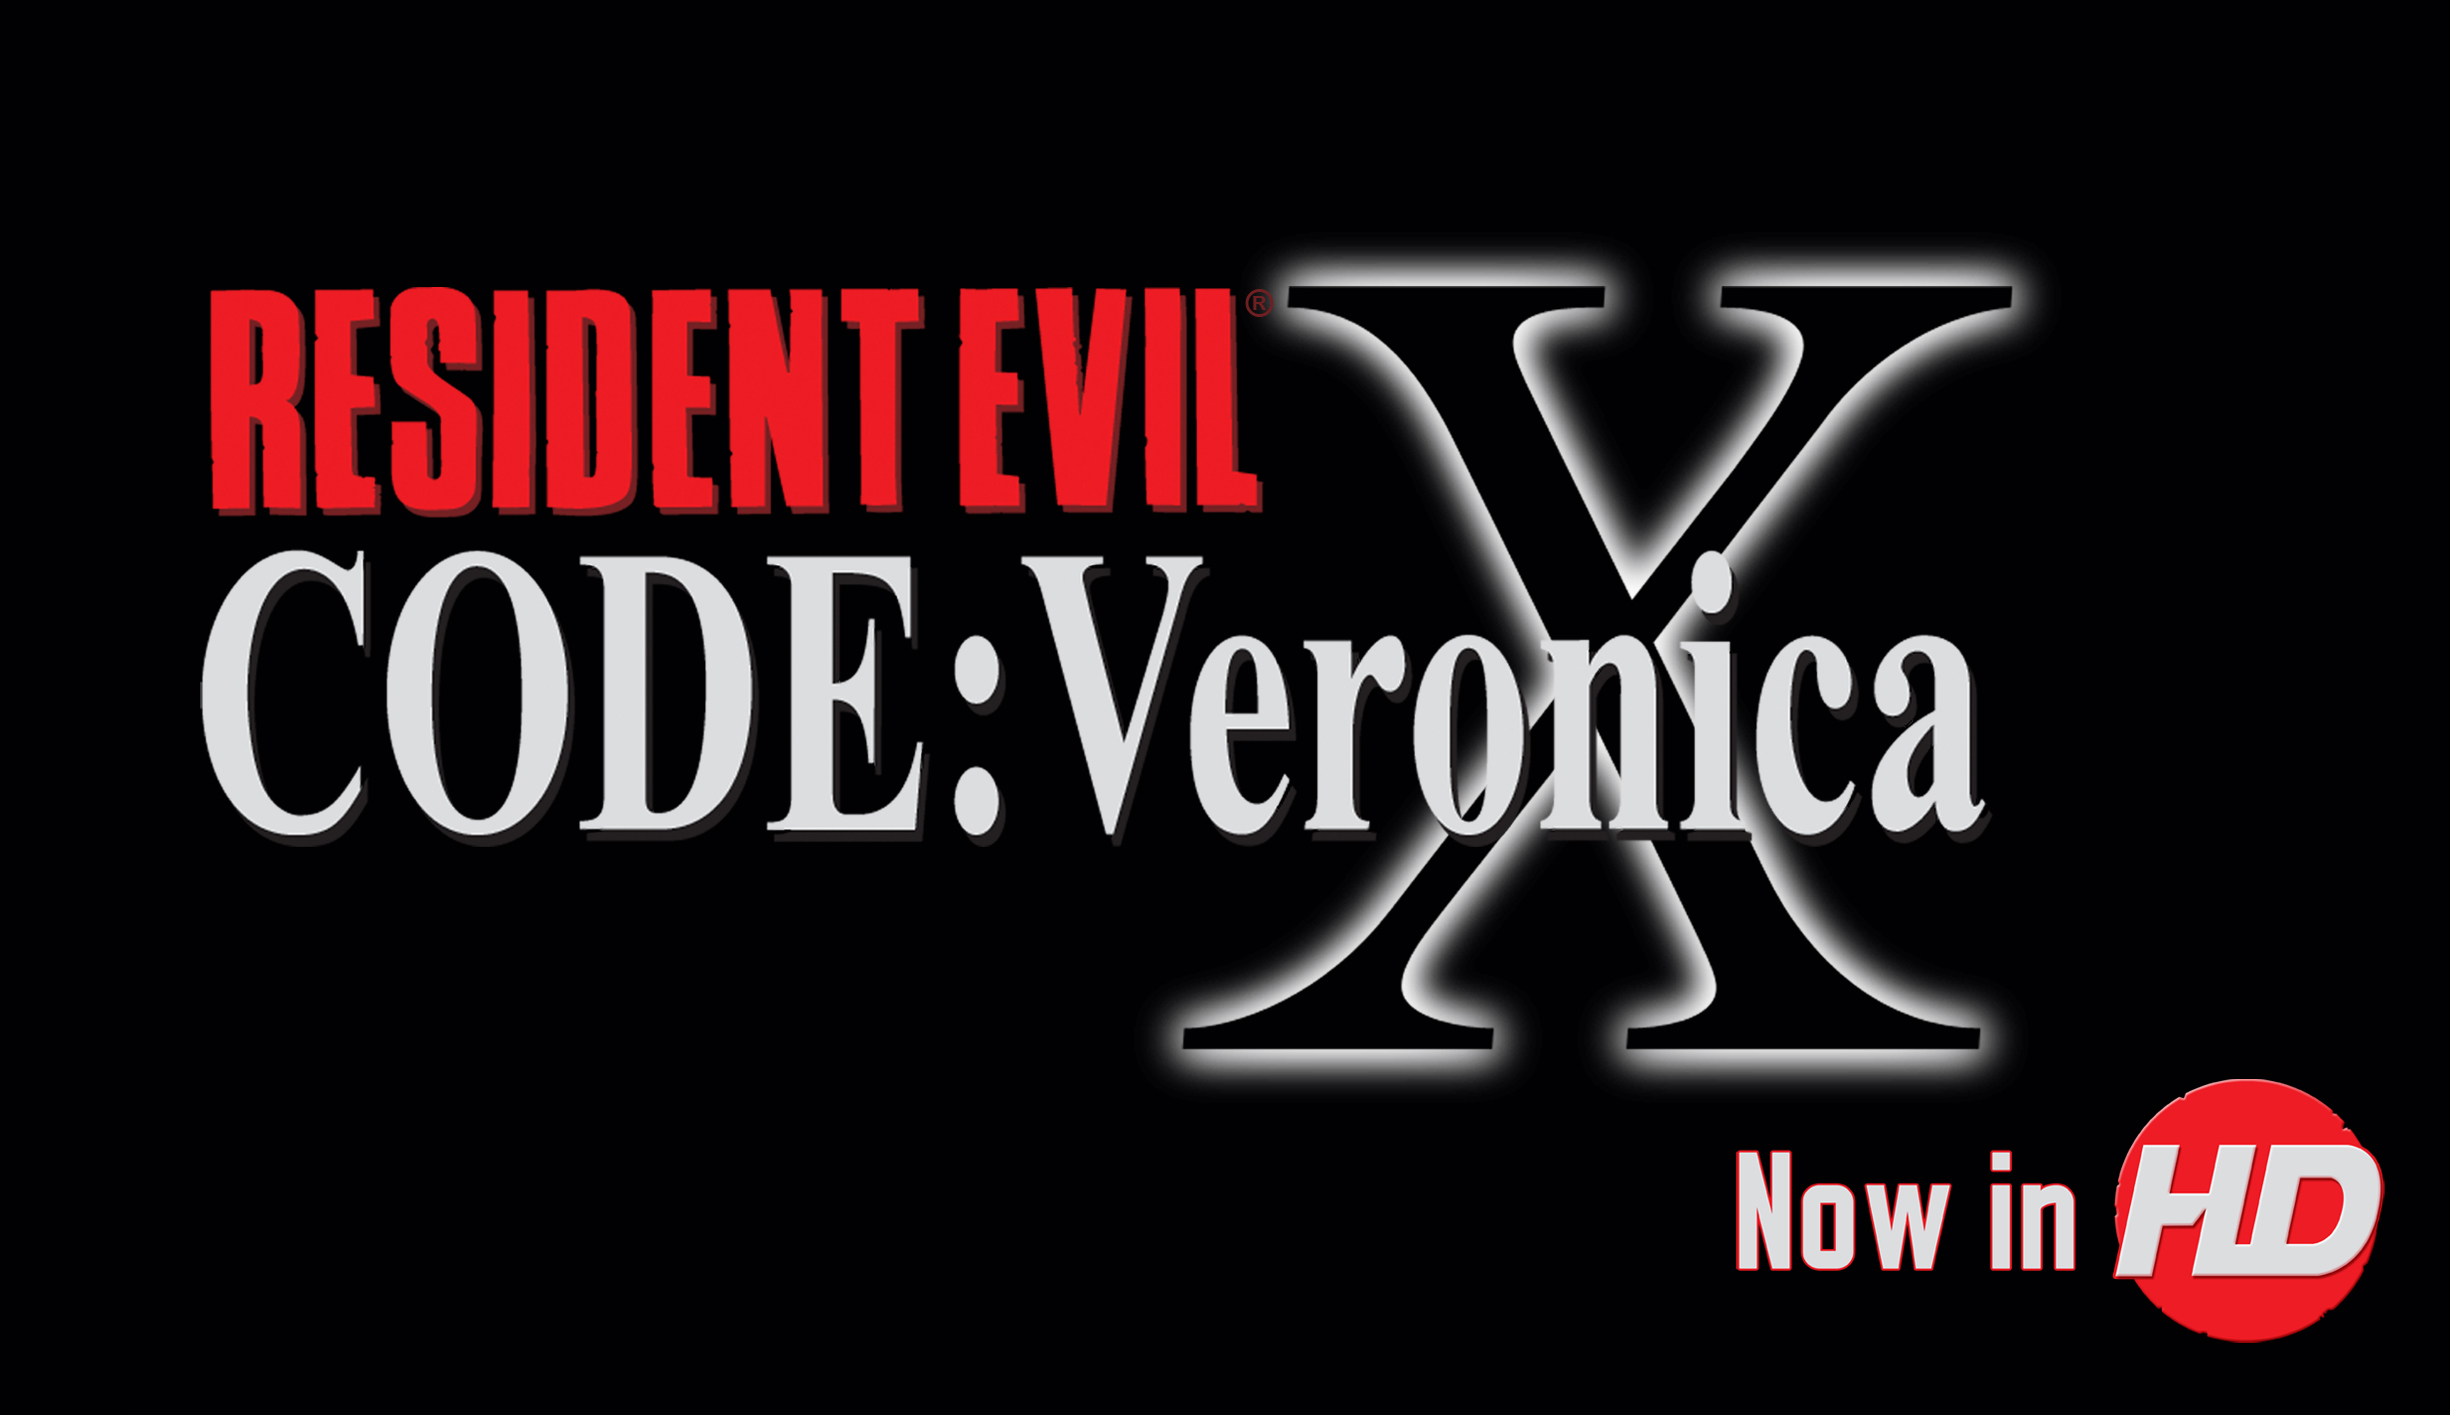 Now's The Time For A Resident Evil - Code: Veronica Remake